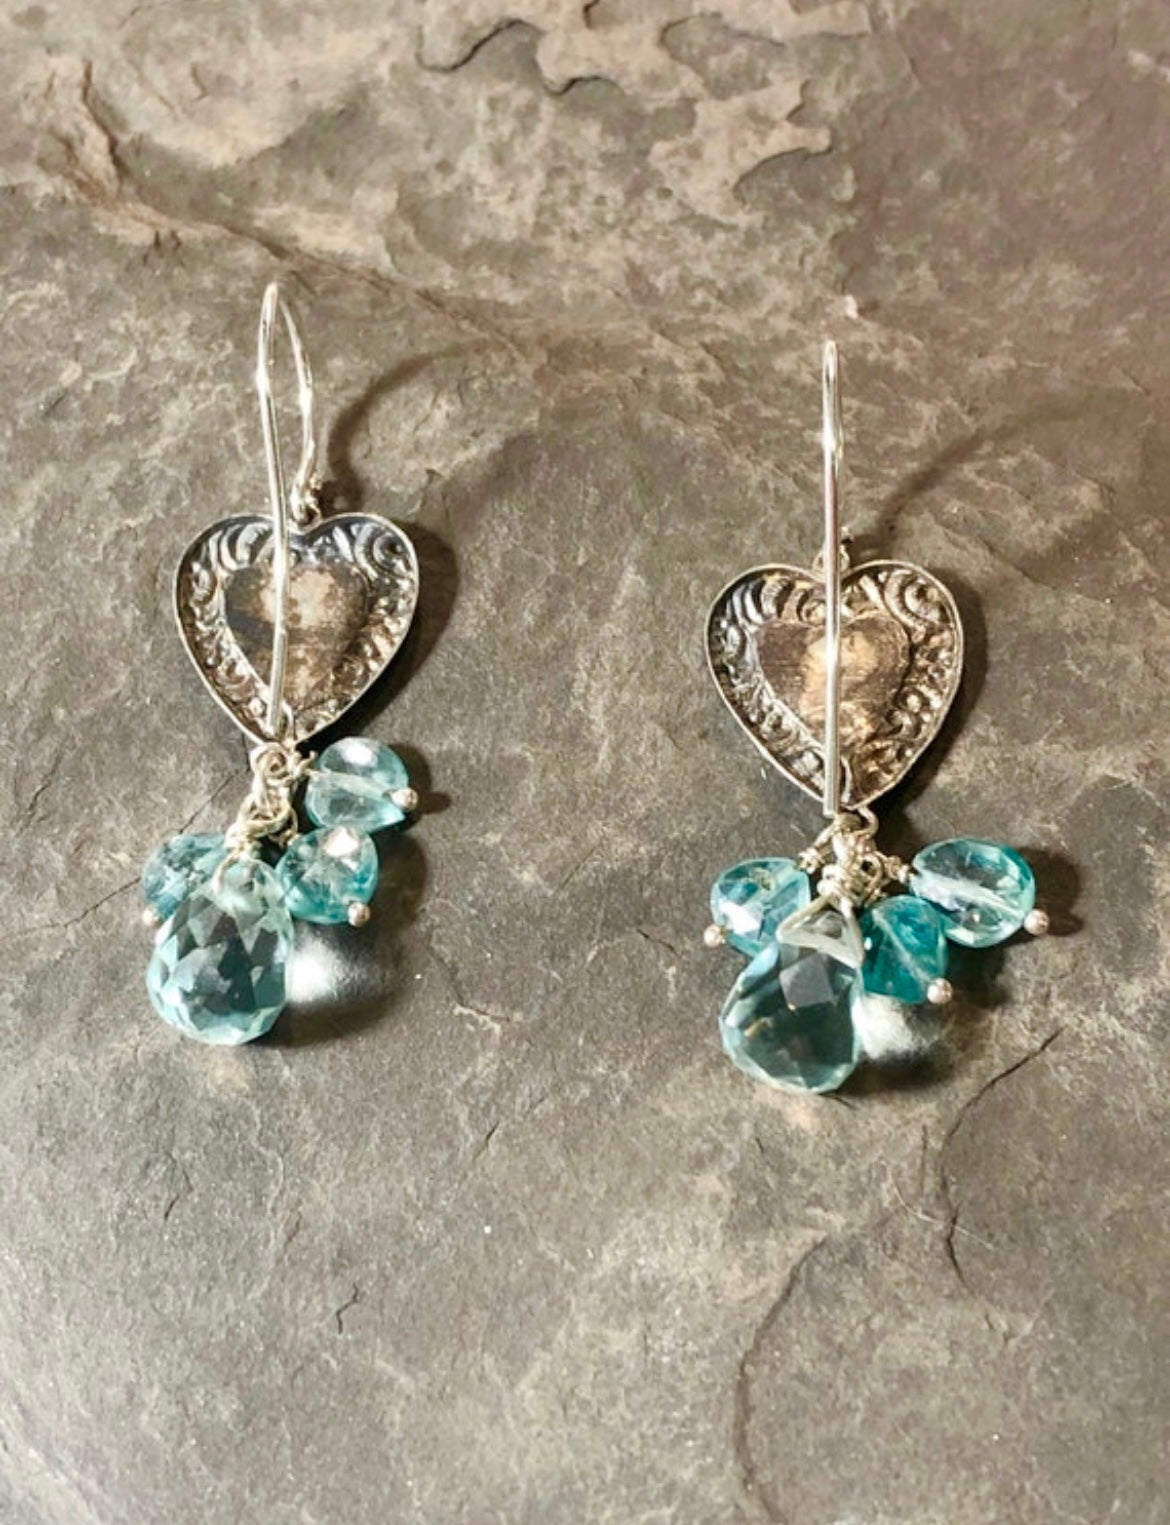 Upcycled Heart Cuff Link Earrings